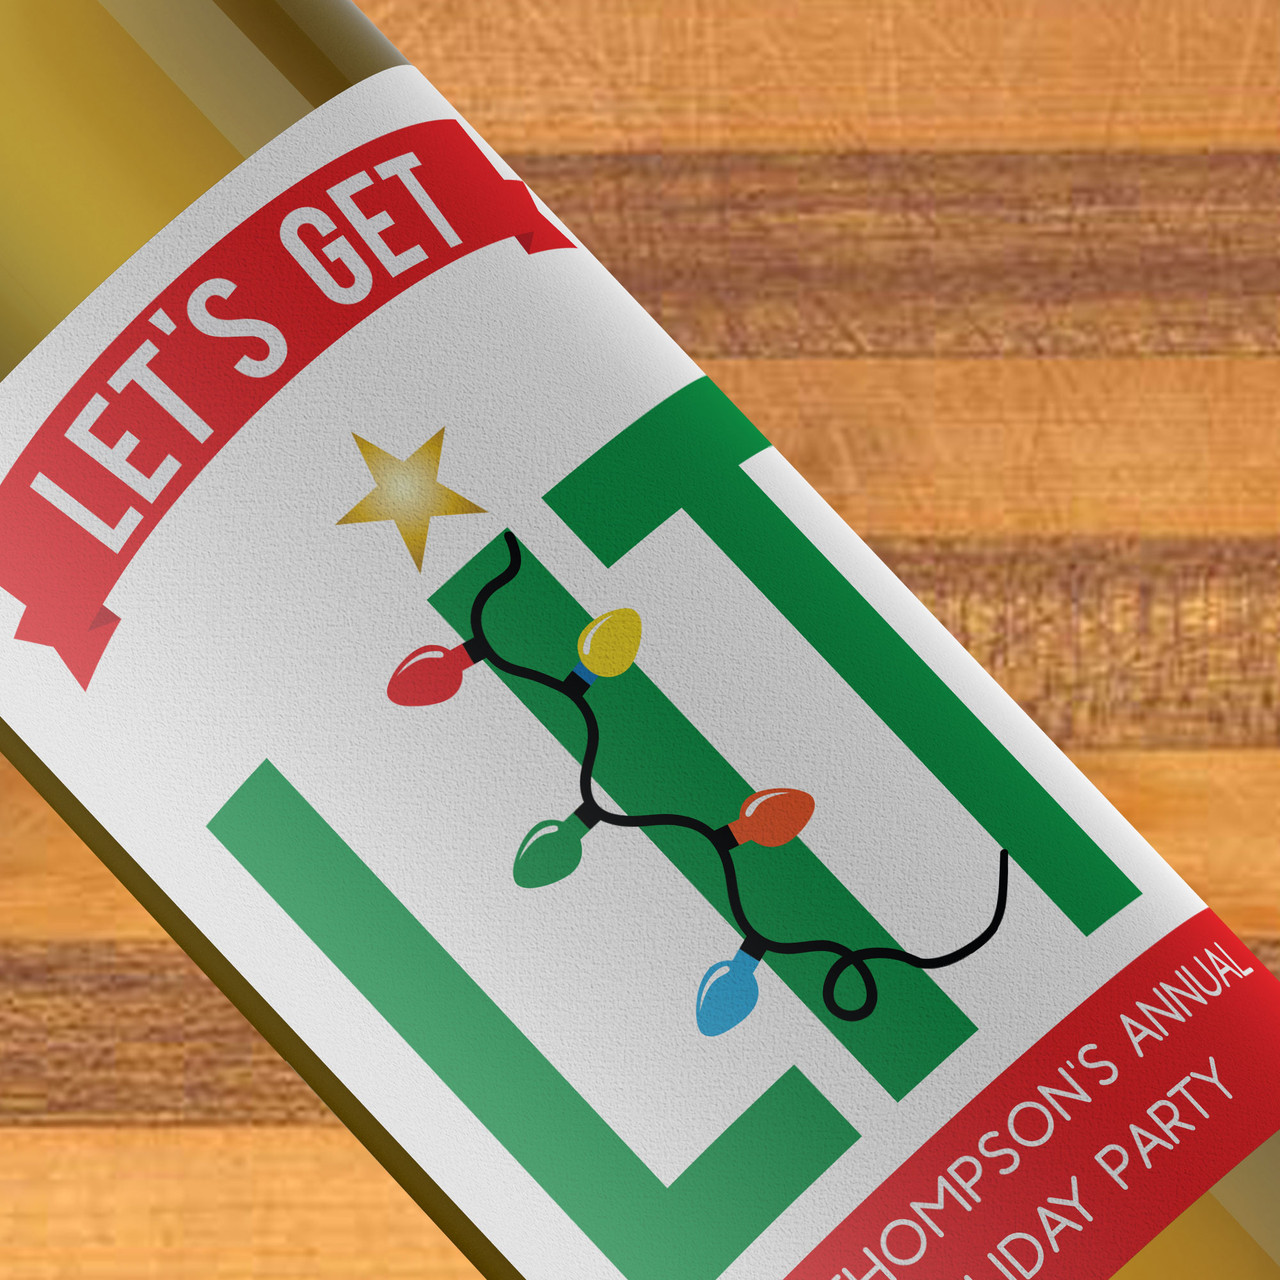 https://cdn11.bigcommerce.com/s-5grzuu6/images/stencil/1280x1280/products/5901/43889/Lets-Get-Lit-Christmas_Personalized_Wine-Labels__81621.1681854833.jpg?c=2